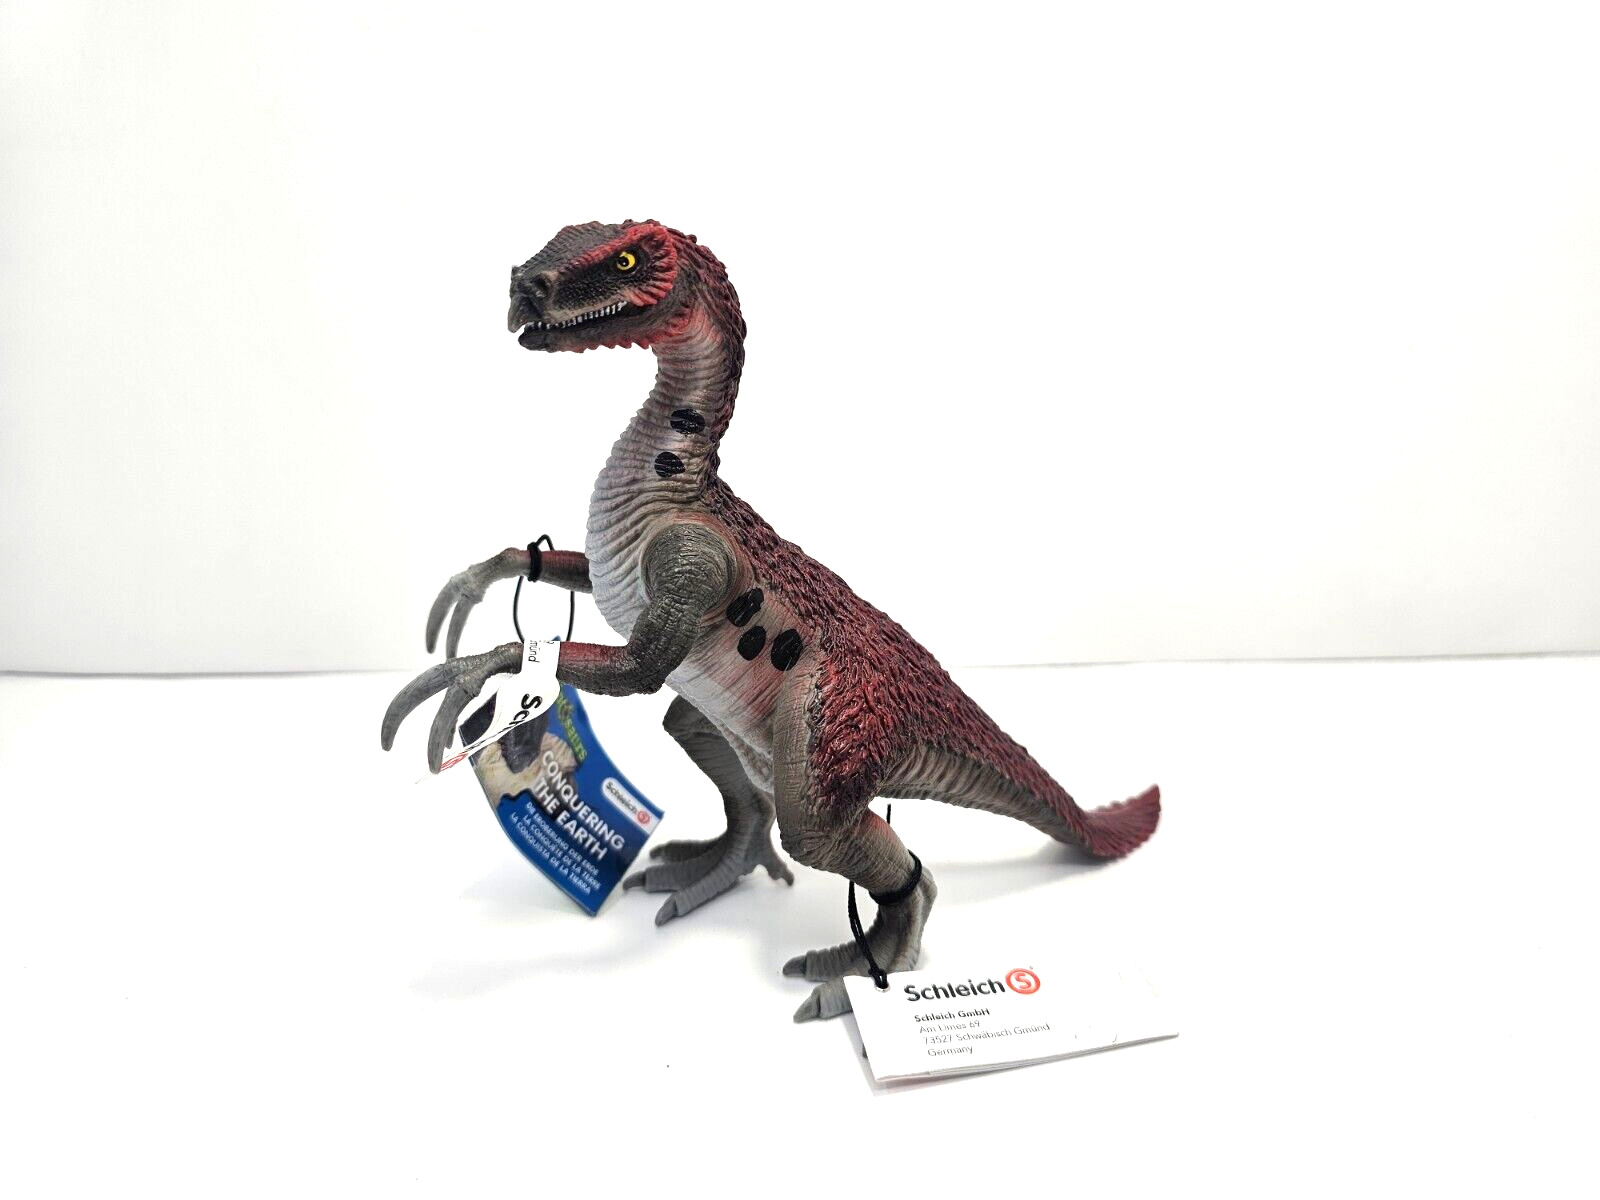 Schleich Conquering the Earth Series Jungtier Therizinosaurus Dinosaur Model NWT